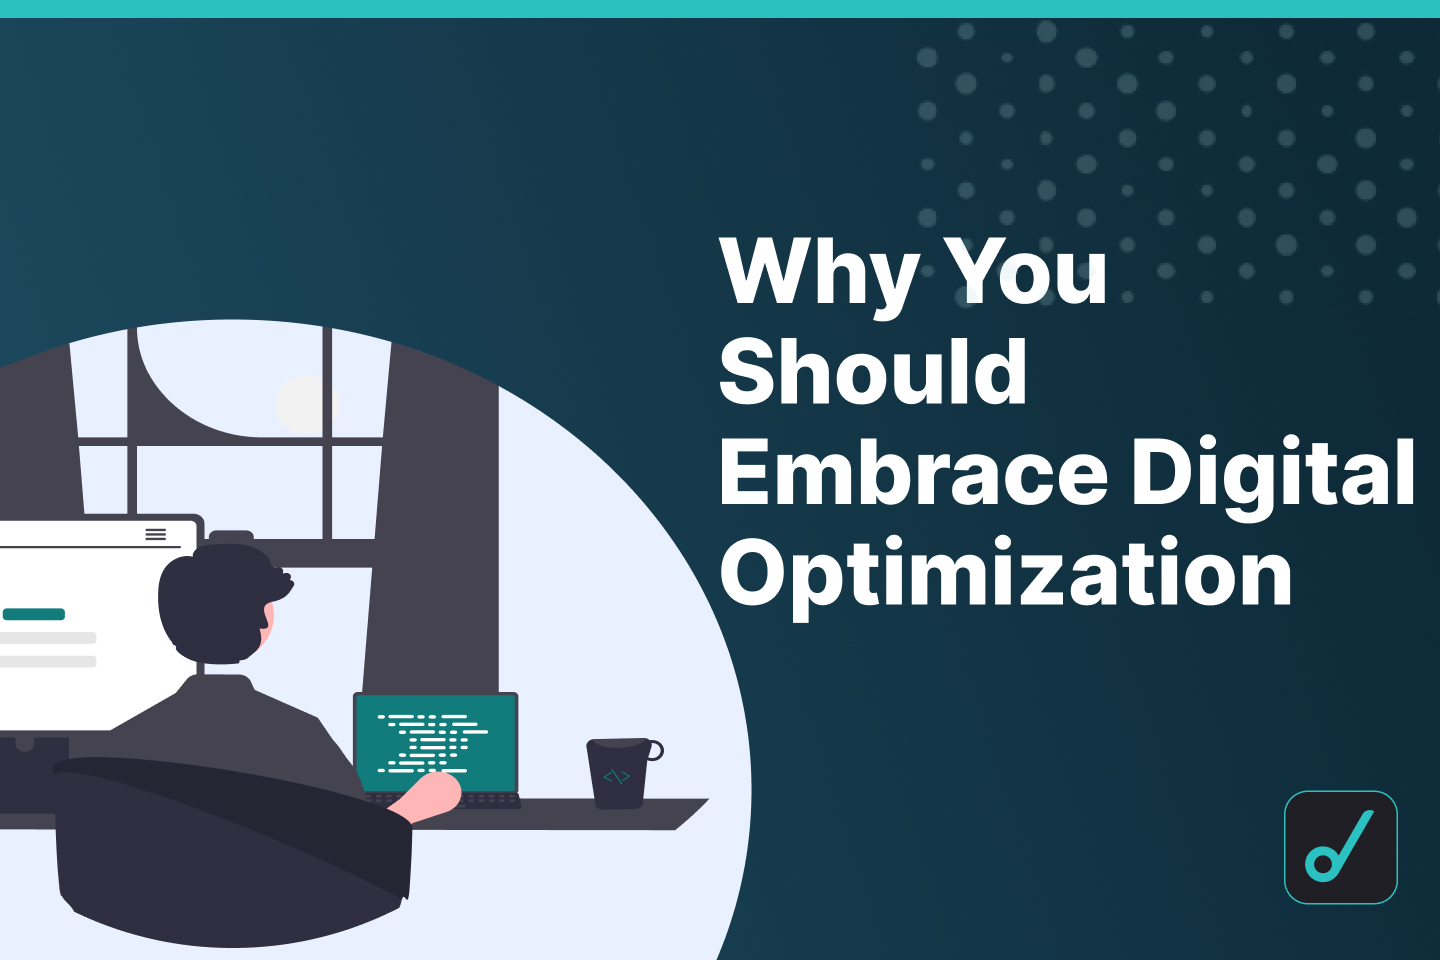 Why Digital Optimization Should Be at the Forefront of Your Data Strategy